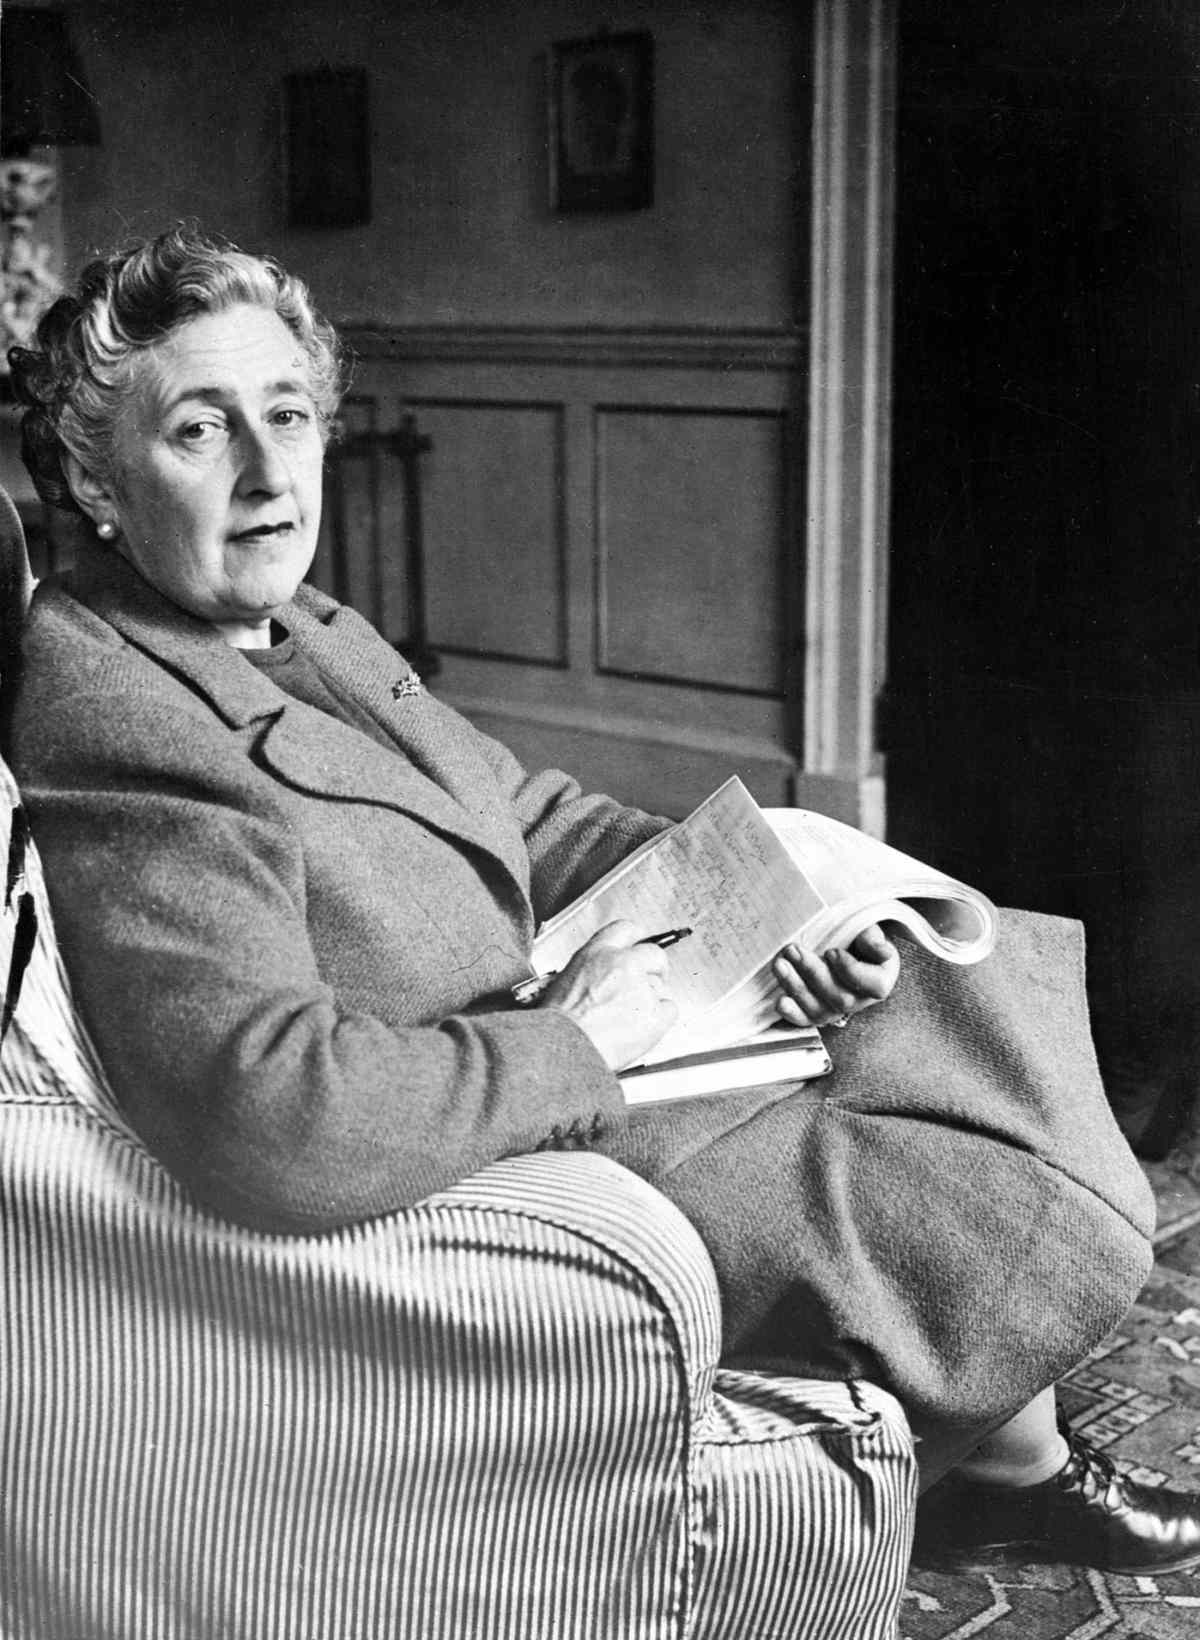 new biography of agatha christie